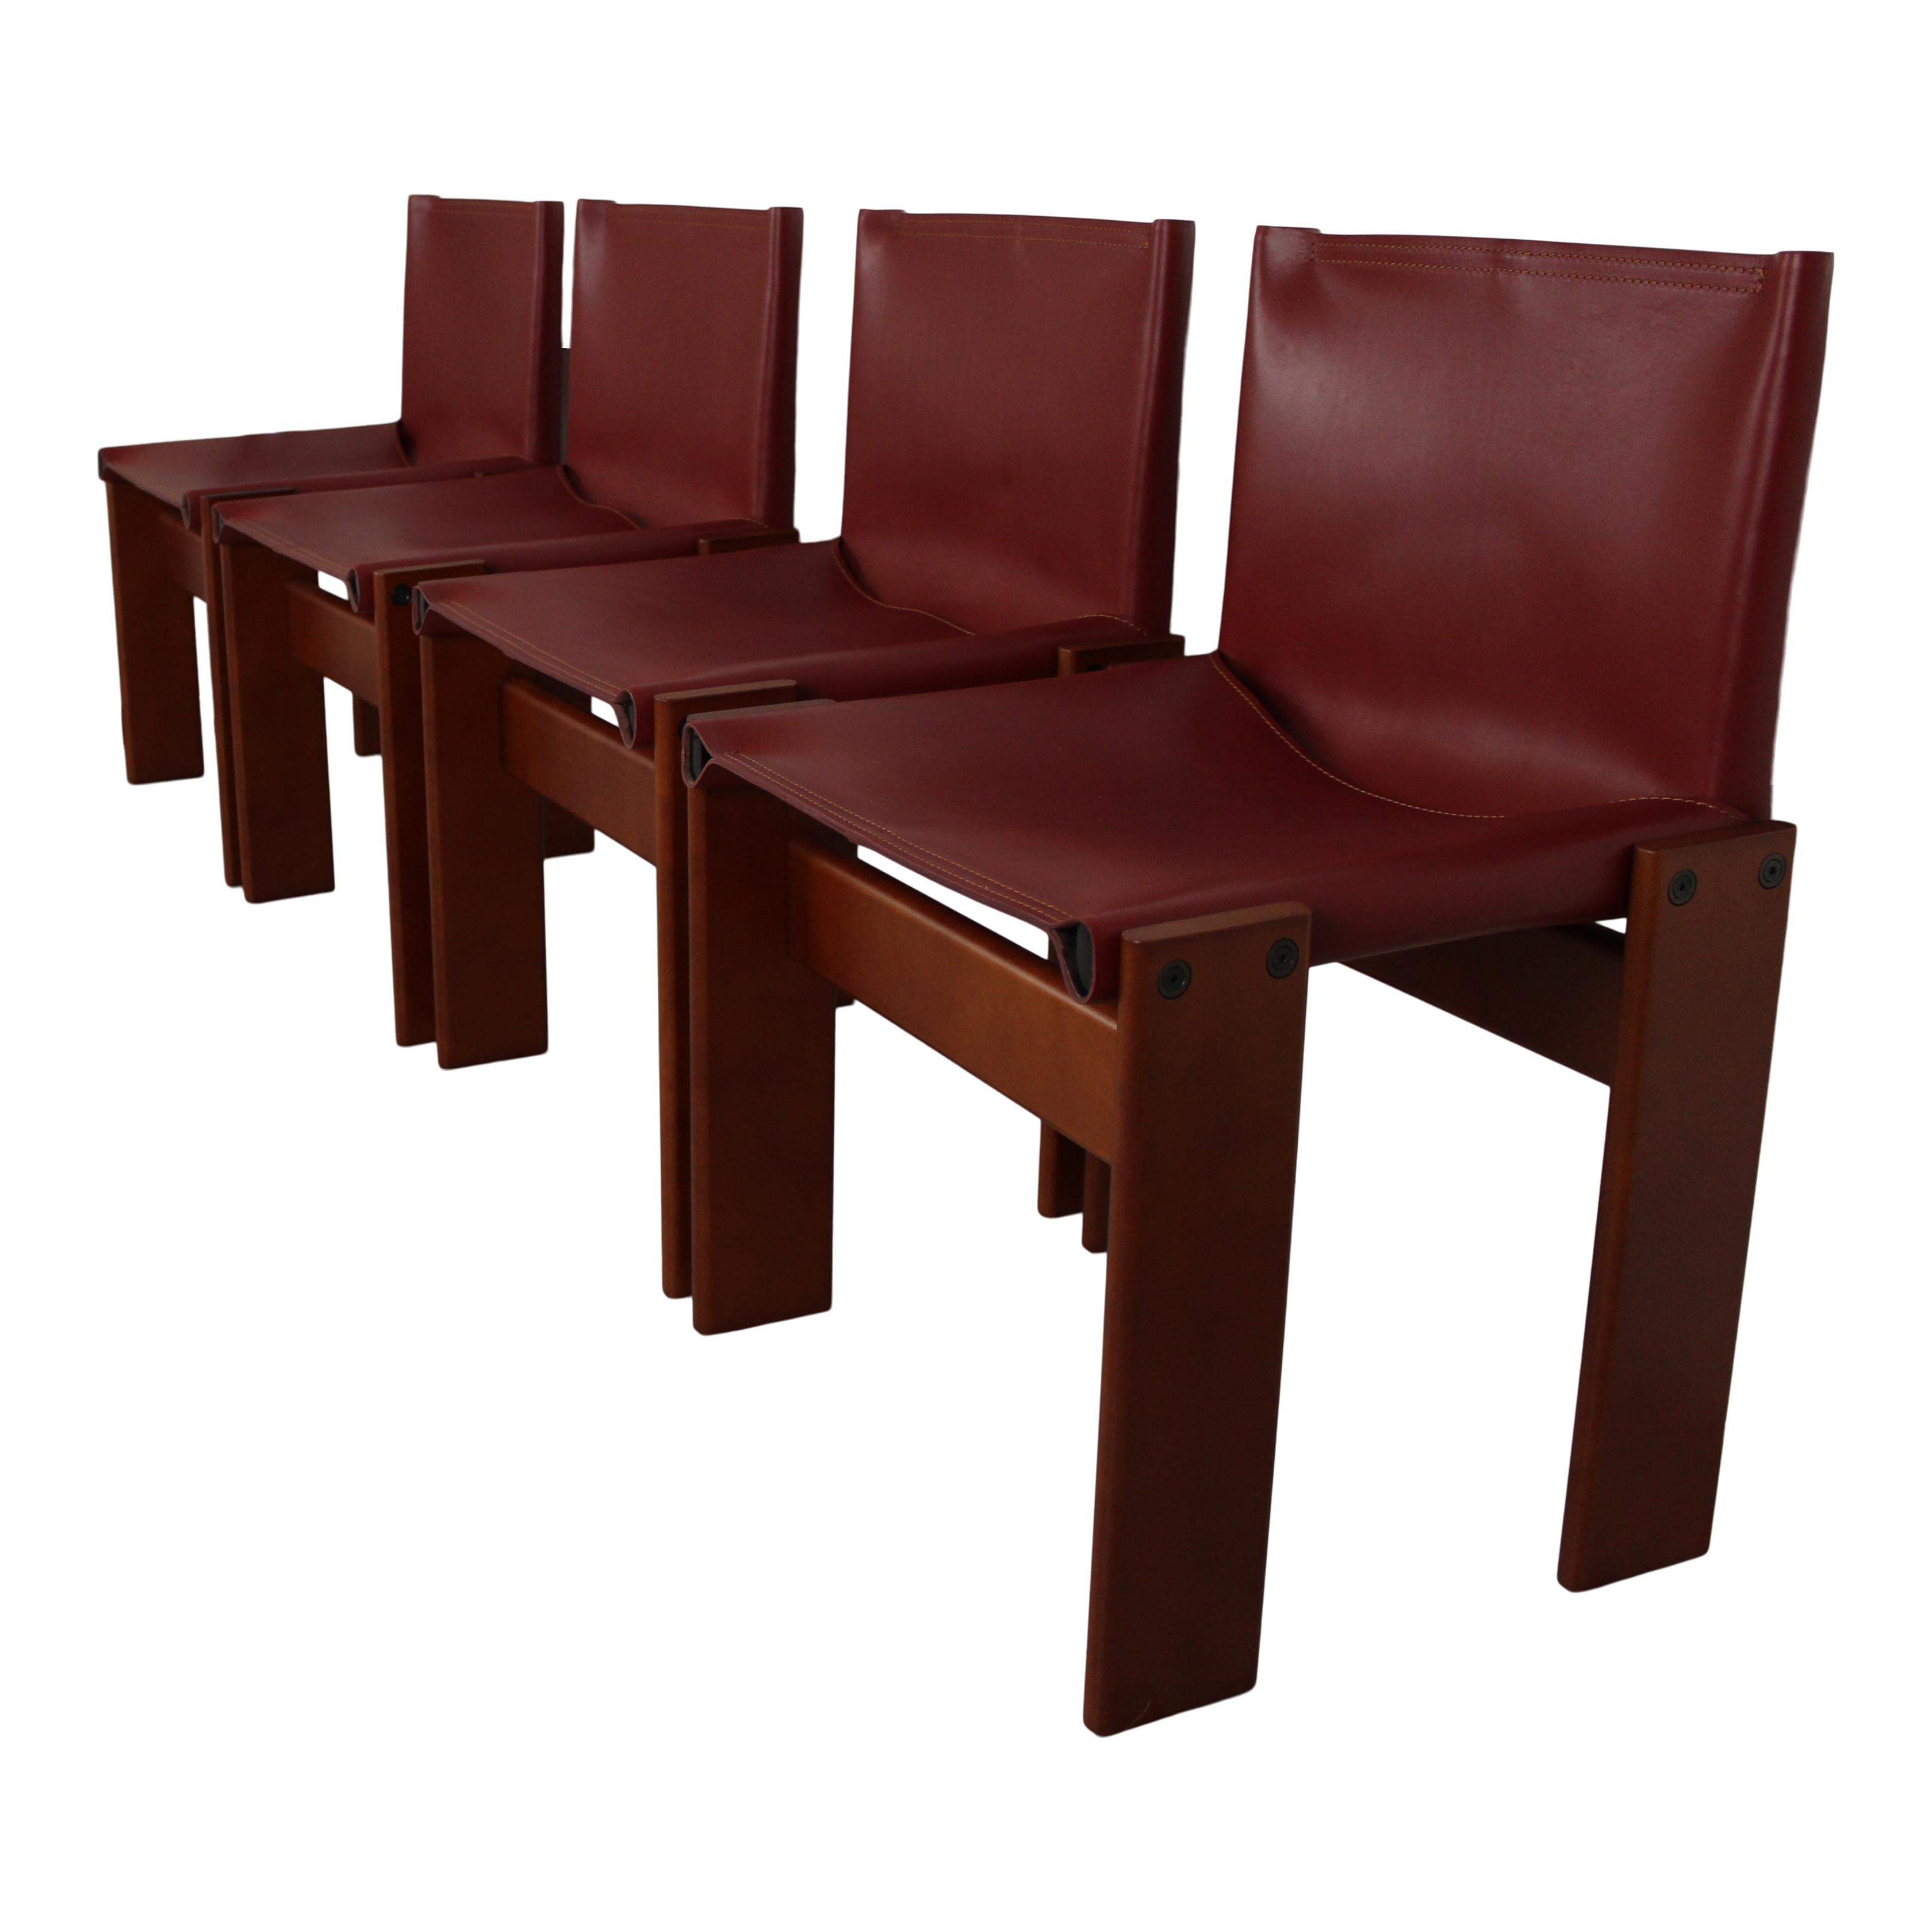 Set of four “Monk” dining chairs designed by Afra and Tobia Scarpa for Molteni in 1973.
Made of English red leather and walnut.
Fully restored in Italy.

Interesting is the ‘flat’ shape of this chair where the designer has chosen to place the legs